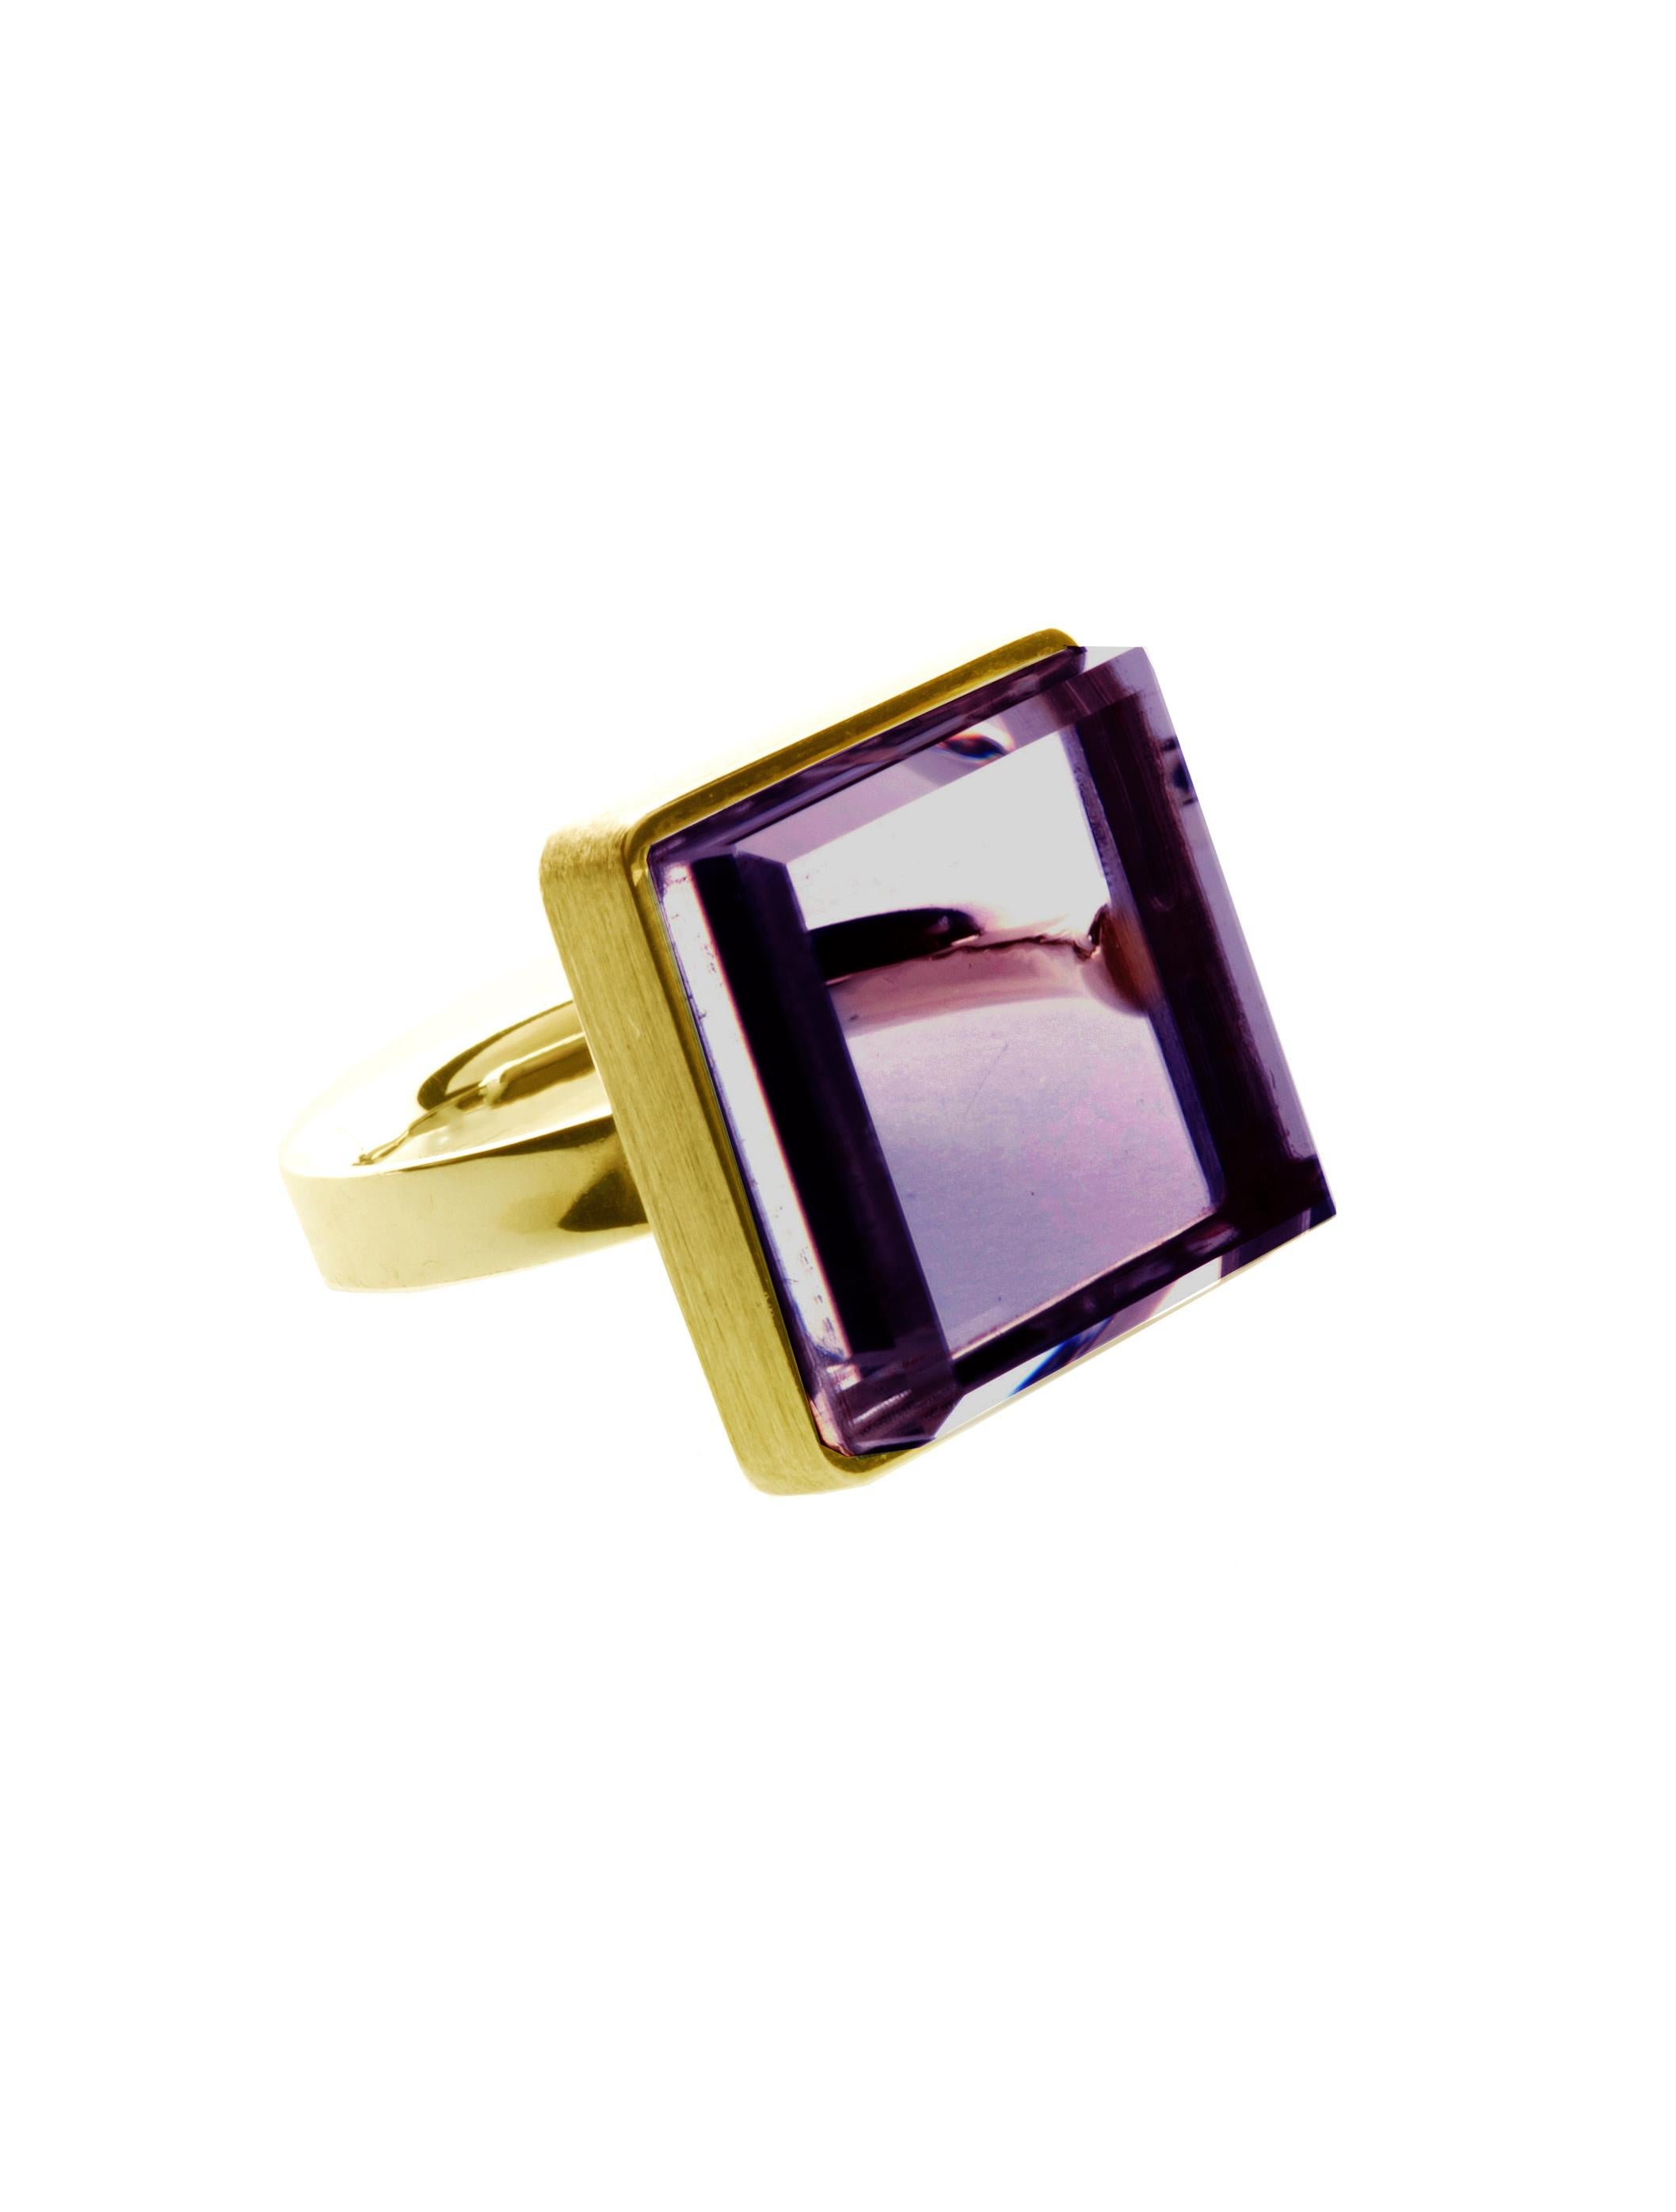 Featured in Vogue Eighteen Karat Yellow Gold Art Deco Style Ring with Amethyst For Sale 5